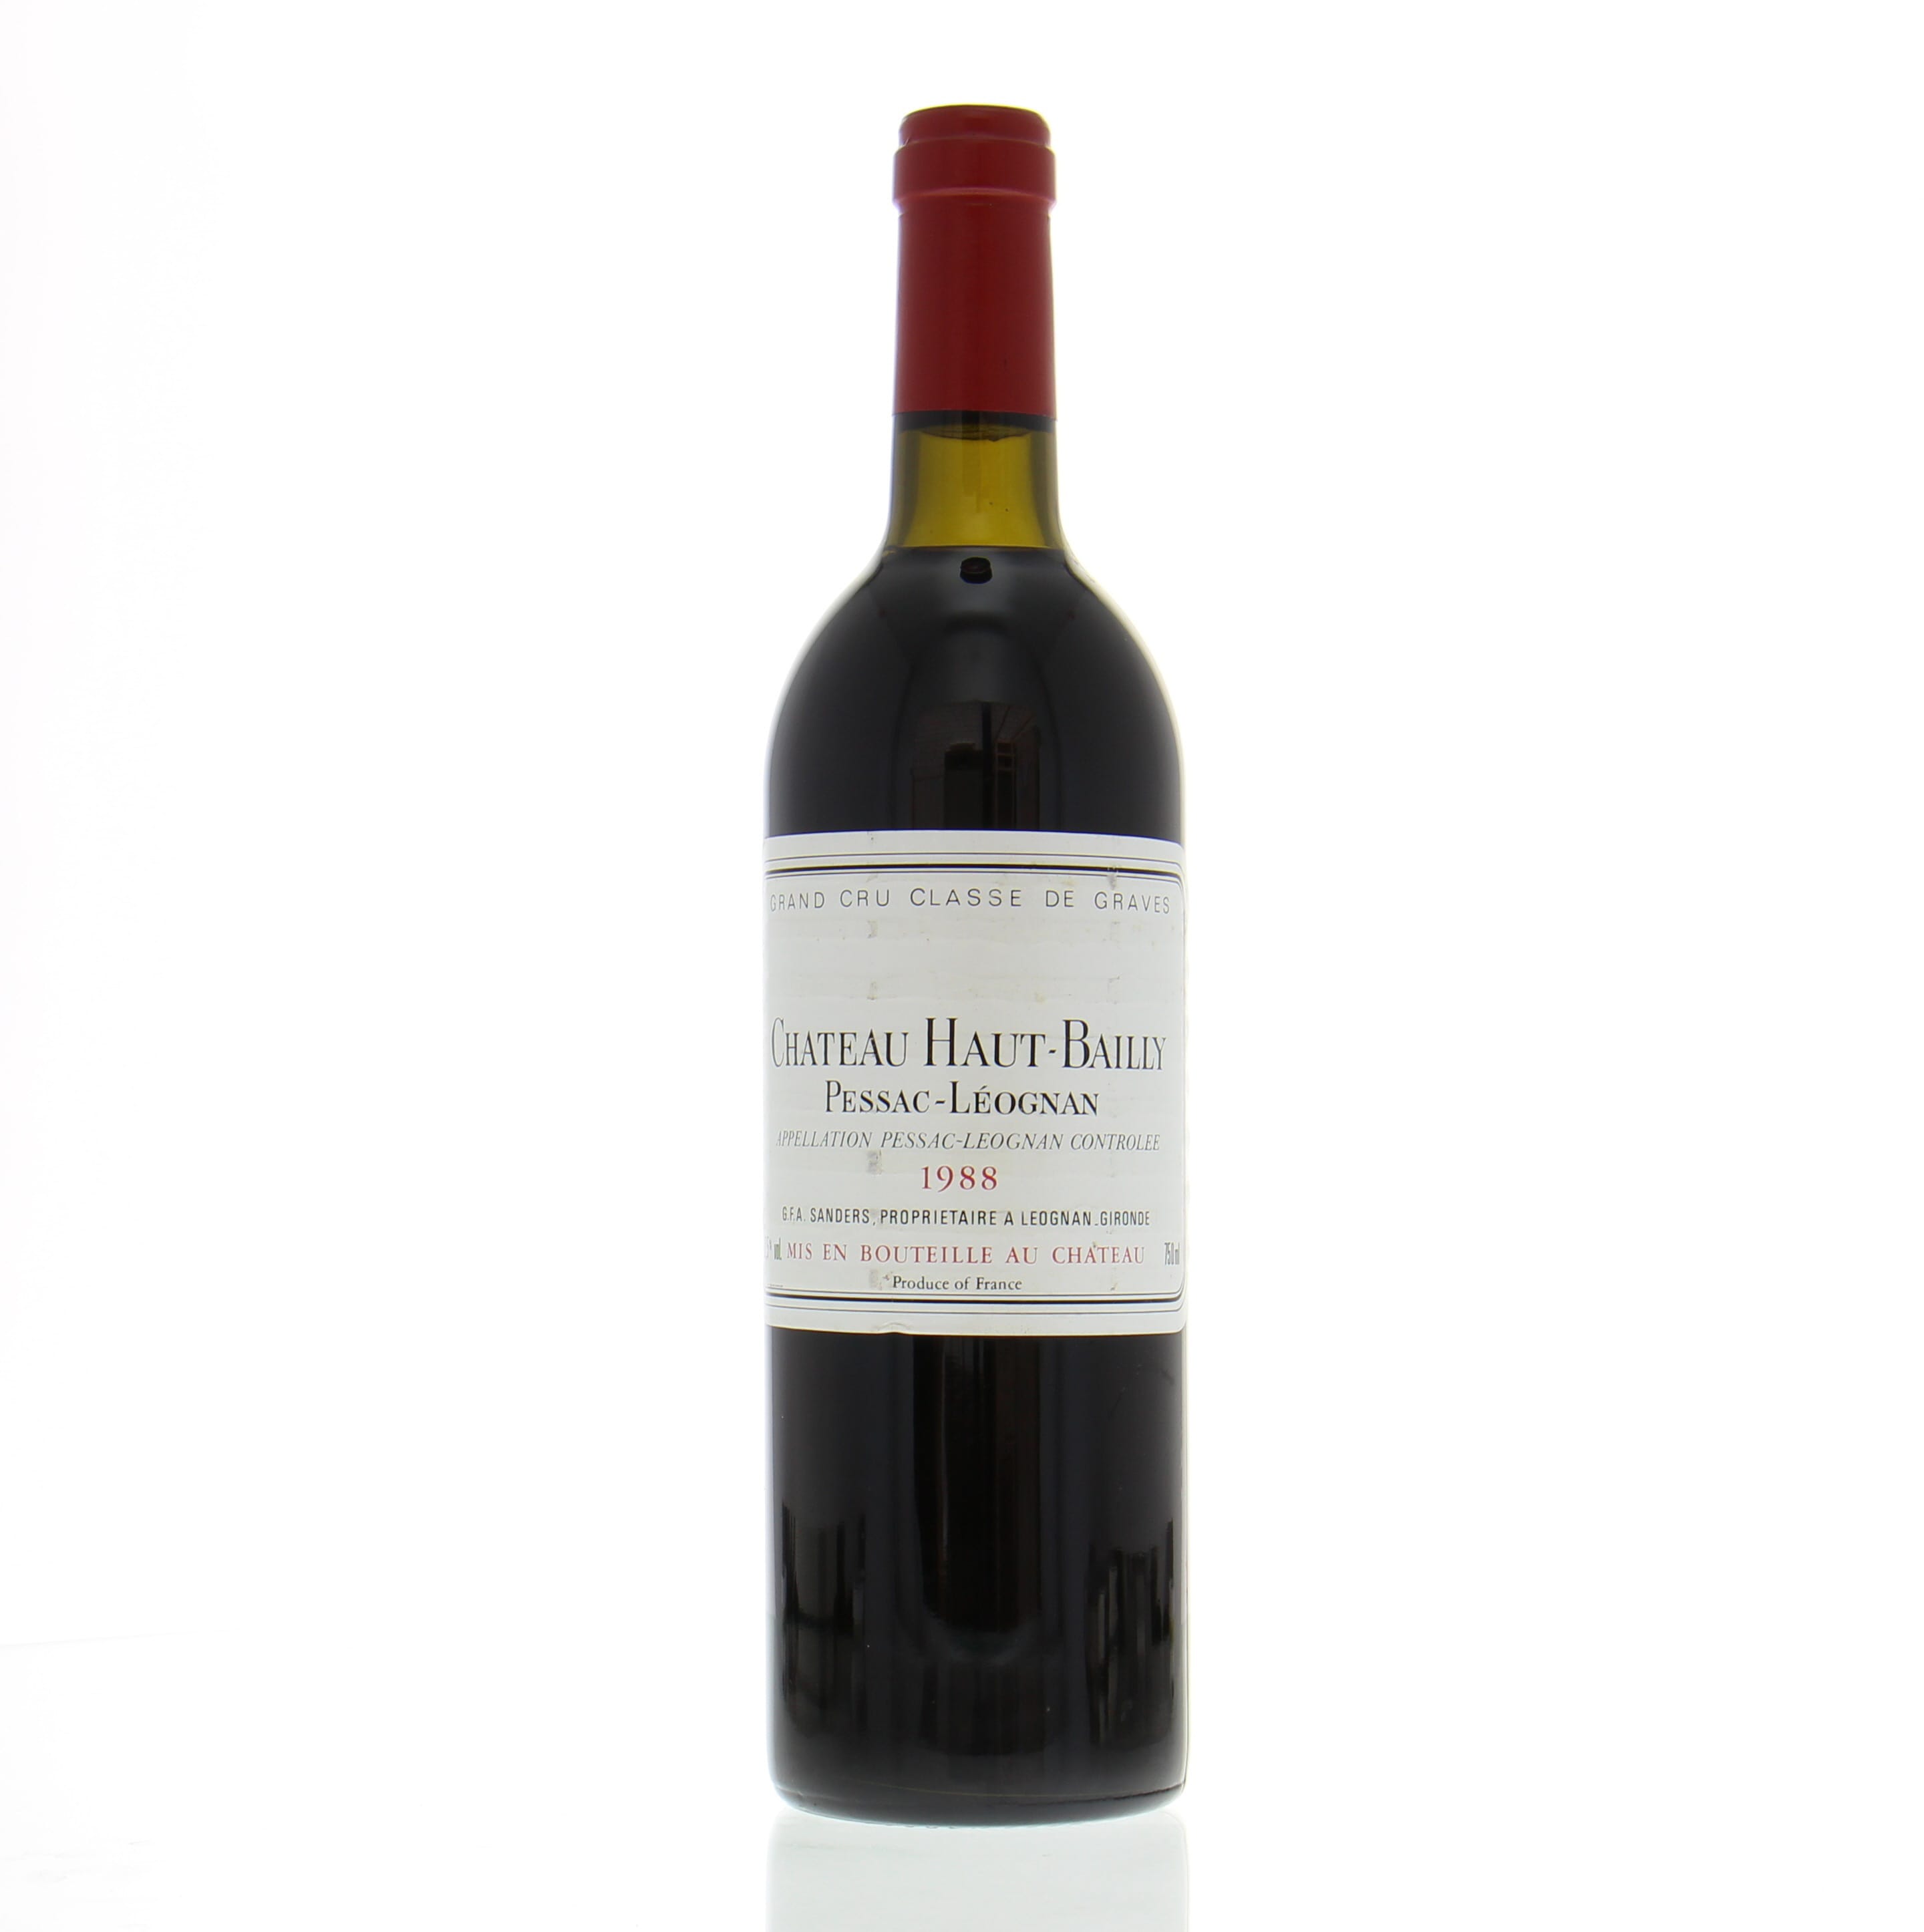 Chateau Haut Bailly - Chateau Haut Bailly 1988 Perfect